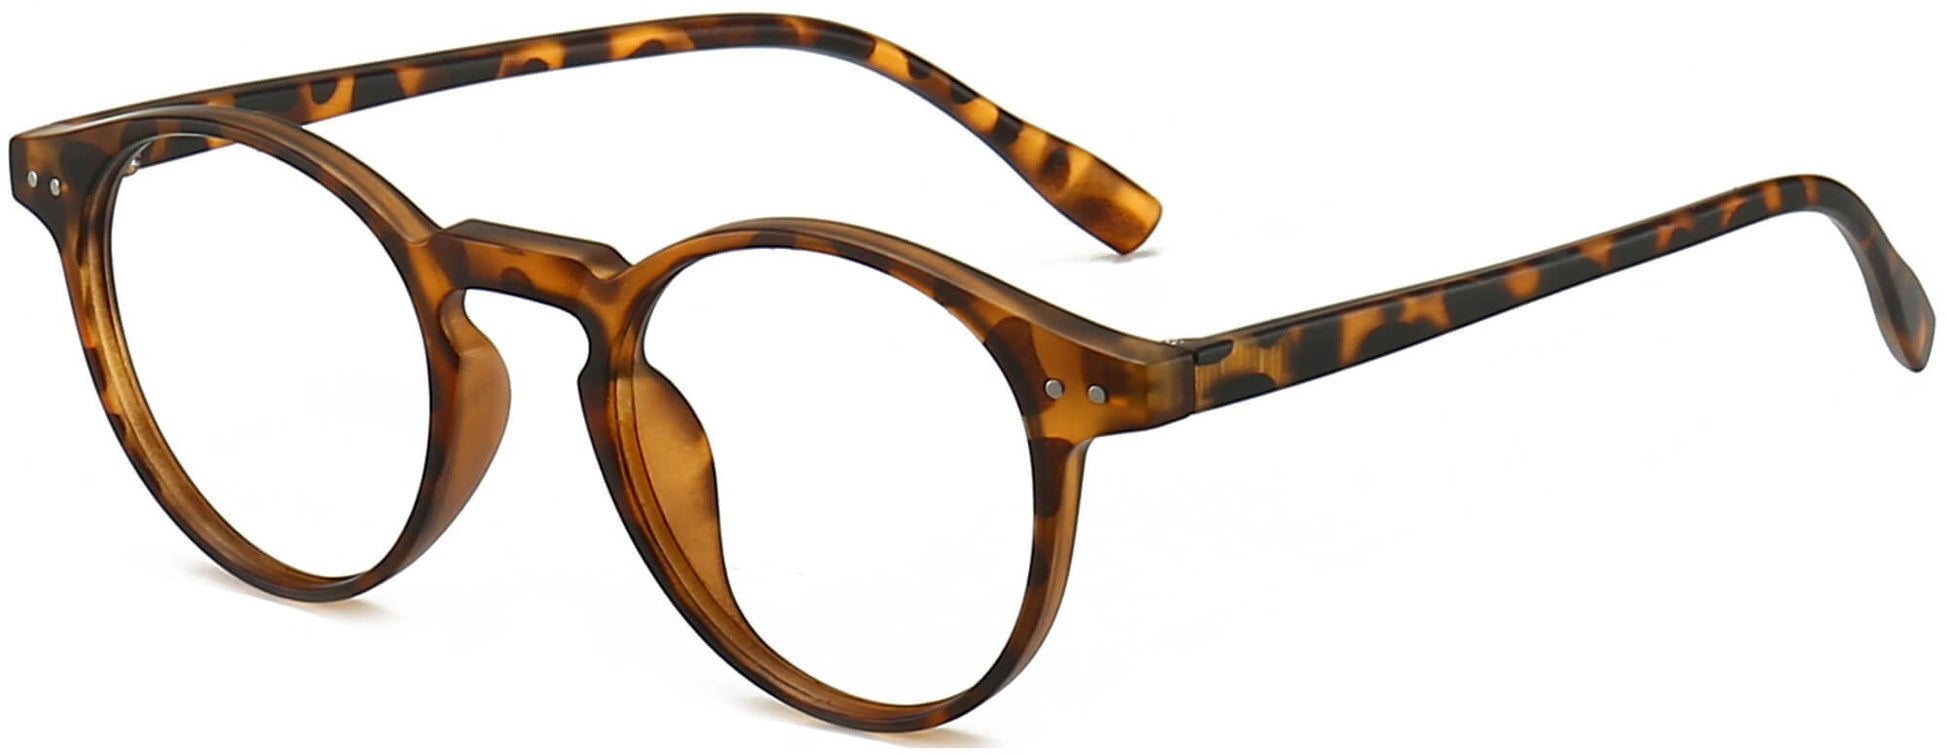 Marcelo Round Tortoise Eyeglasses from ANRRI, angle view